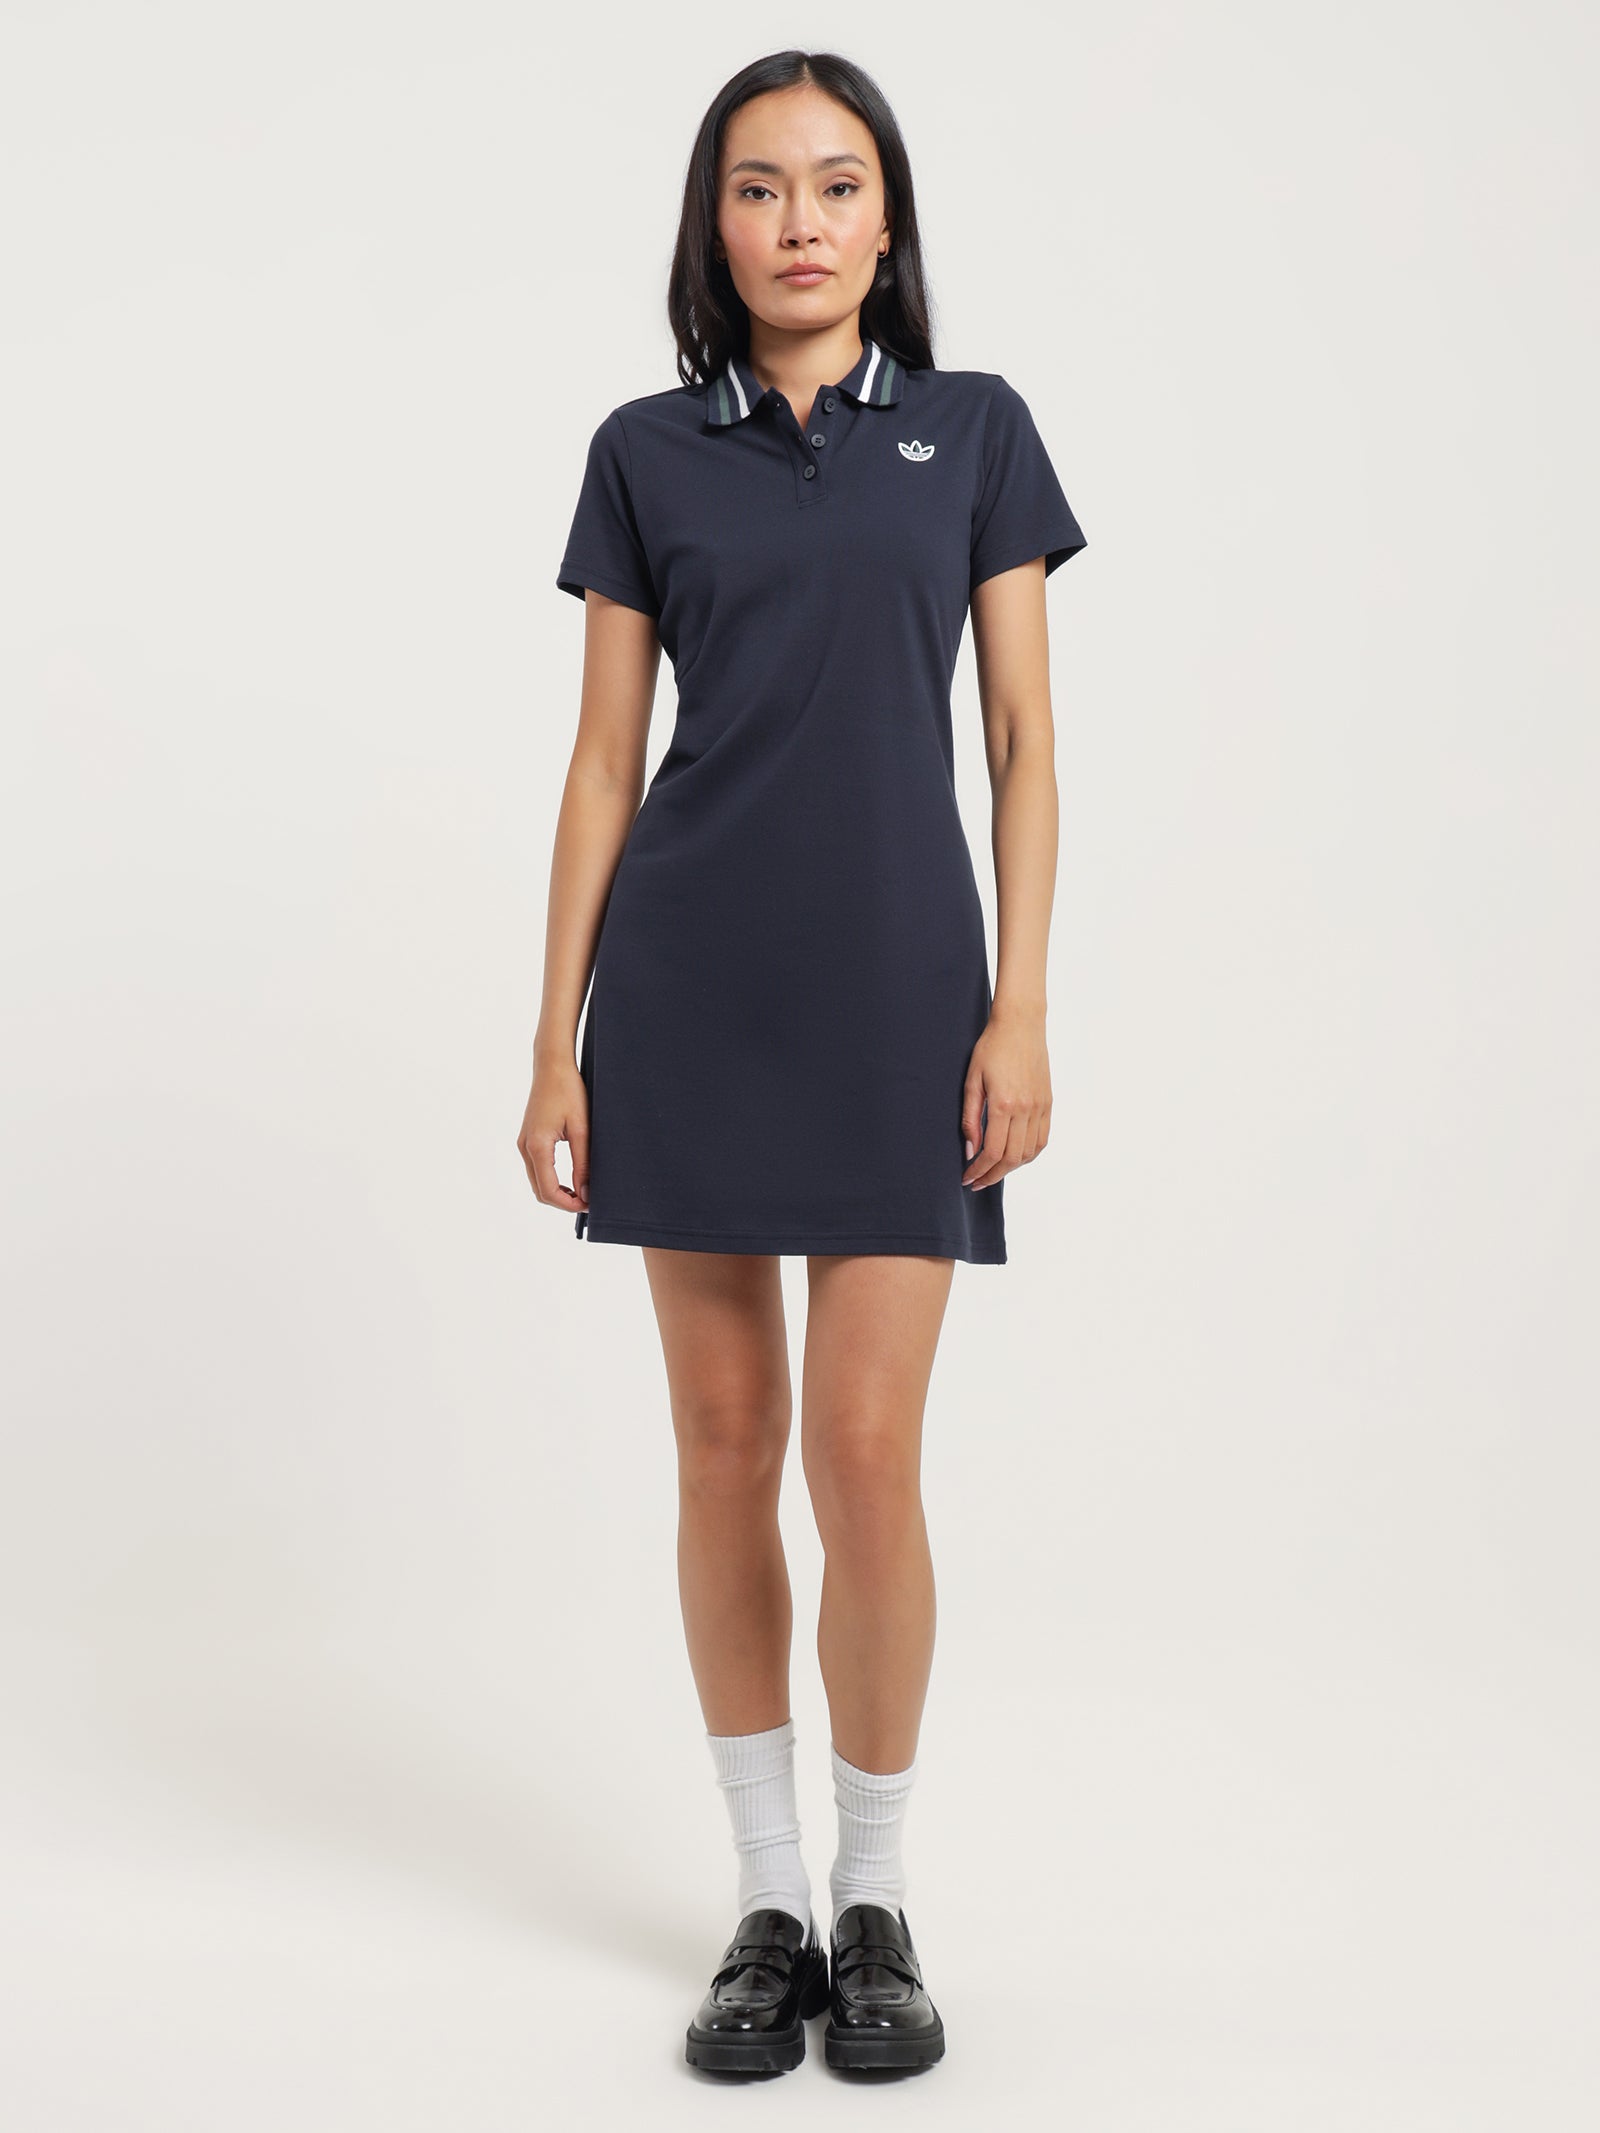 Originals Class of 72 Polo Dress in Ink